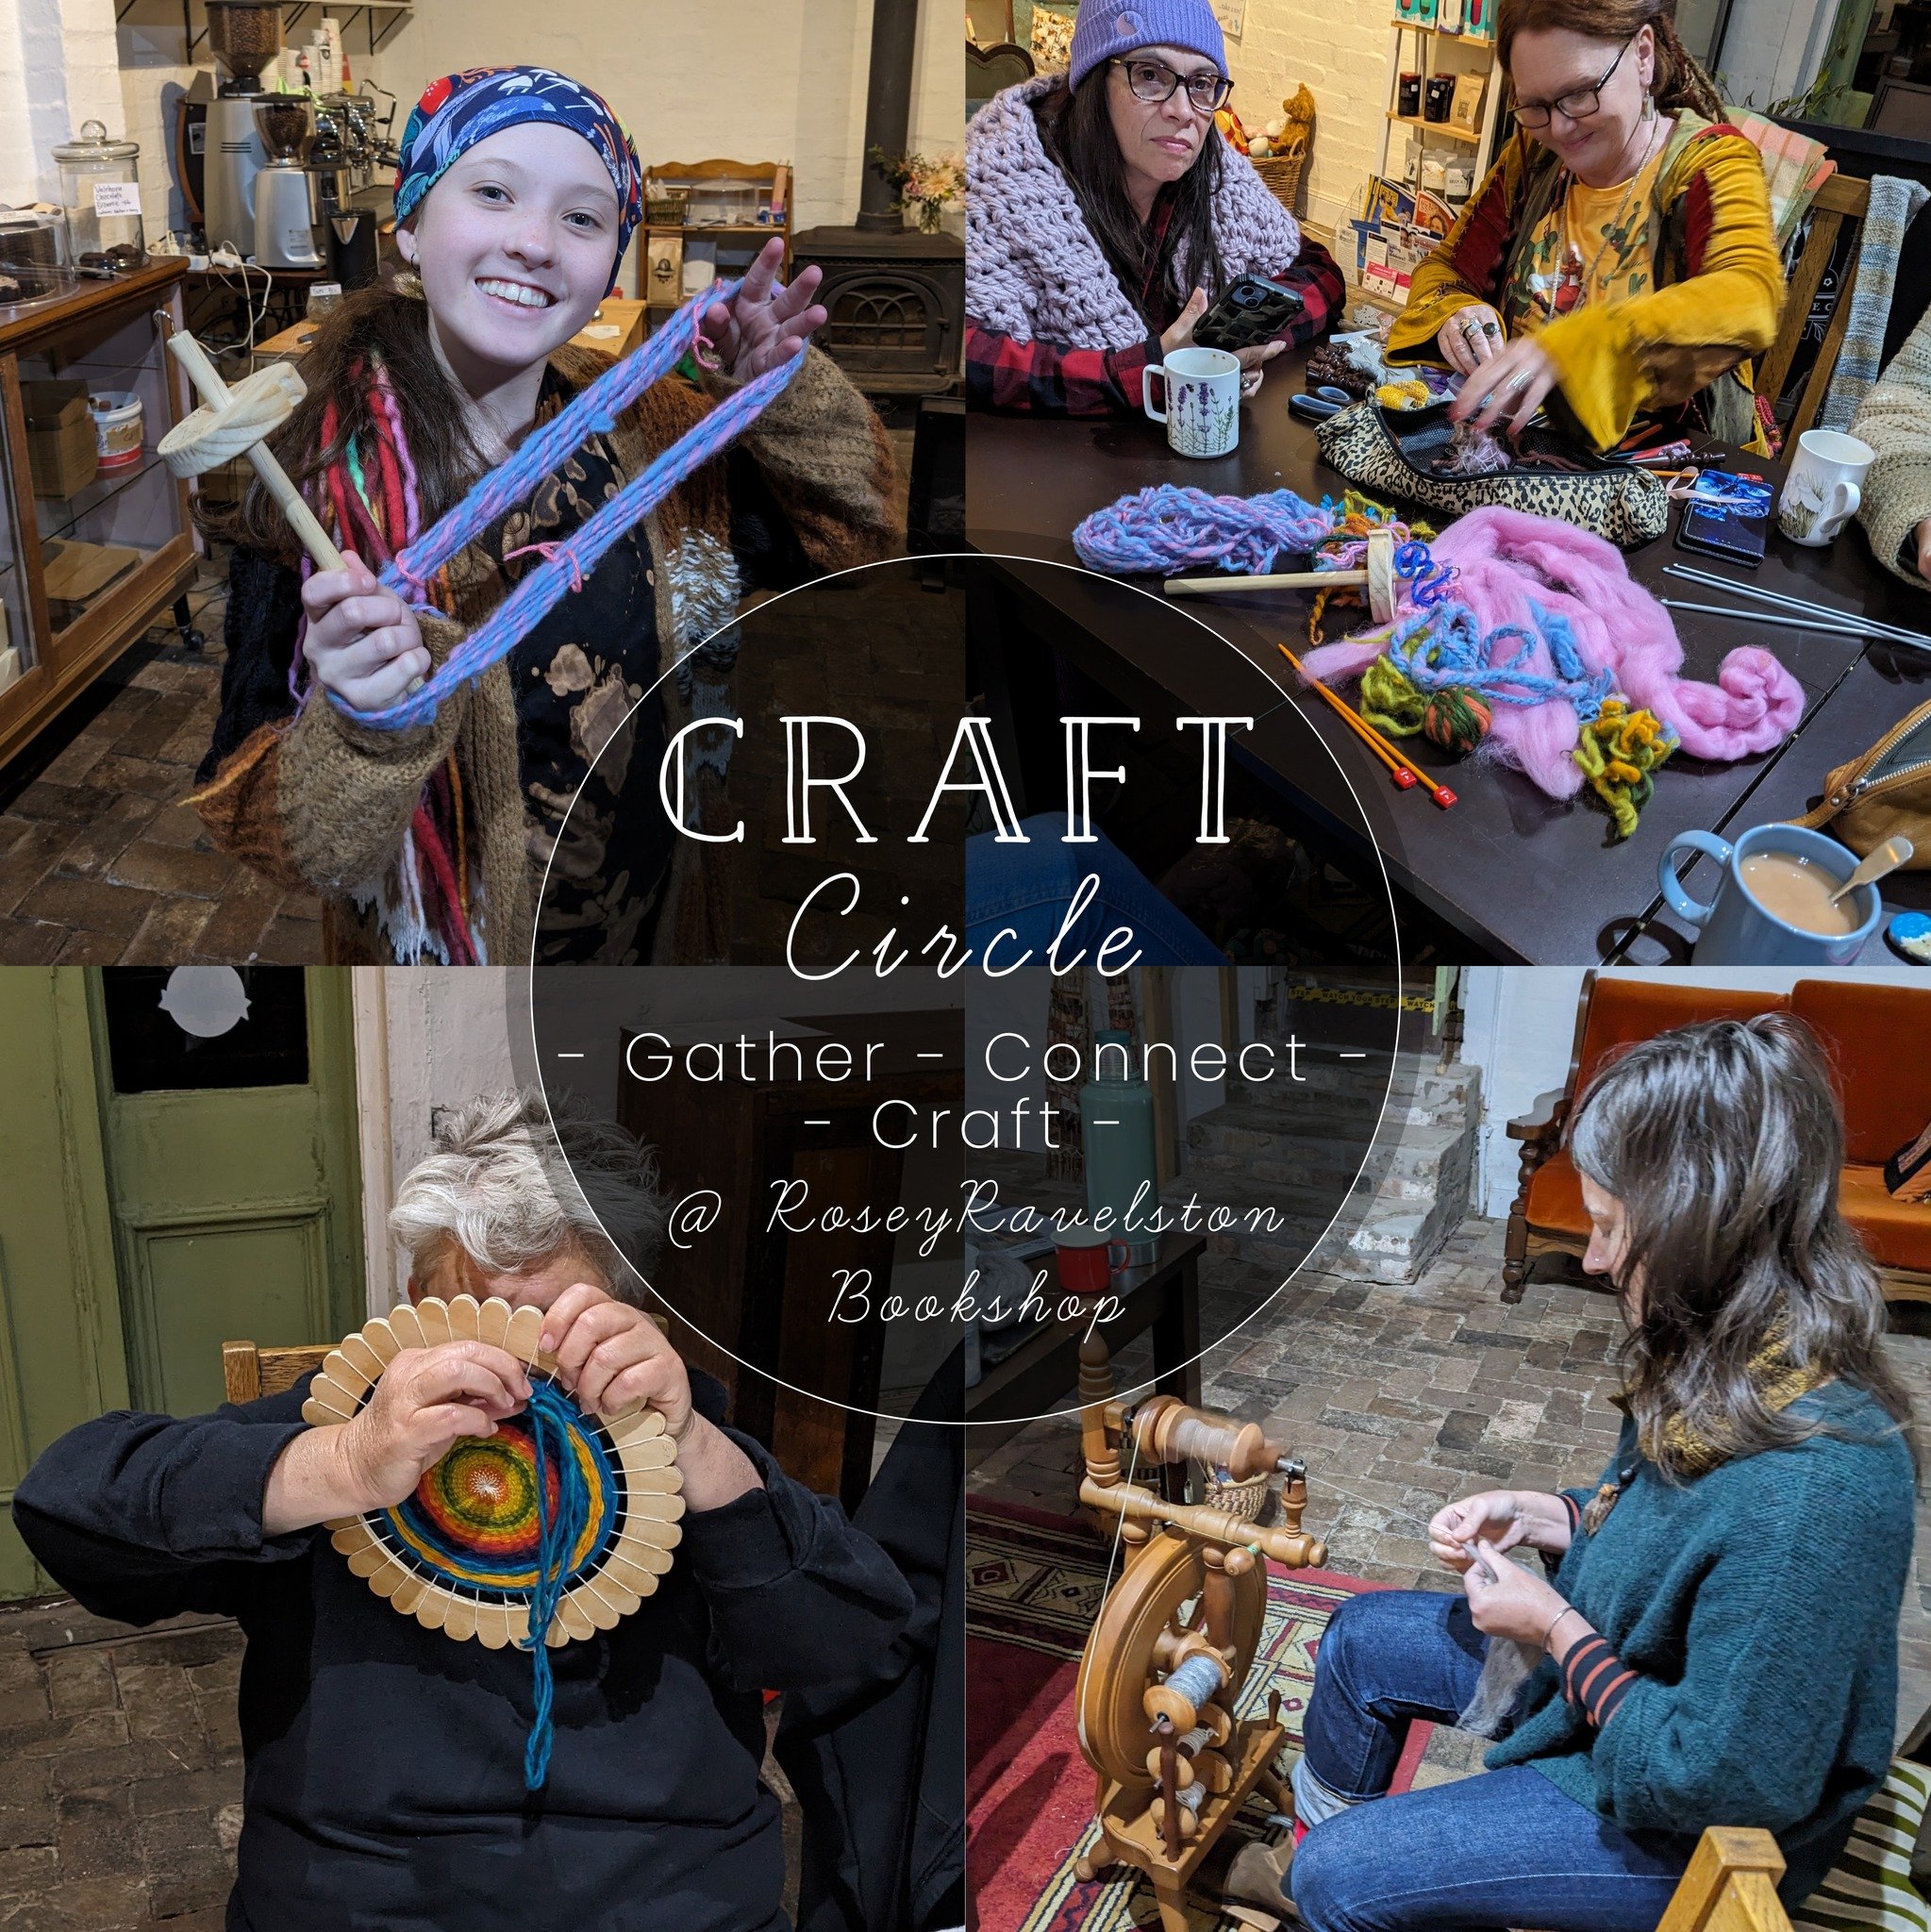 It&rsquo;s that time of the month again! Join us next Saturday 18 at 6 pm in @roseyravelstonbooks for Craft Circle. All crafts and craftspeople welcome!

For your calendar: Craft Circle, the 3rd Saturday of Every Month, from 6 pm to 9 pm! 

As always